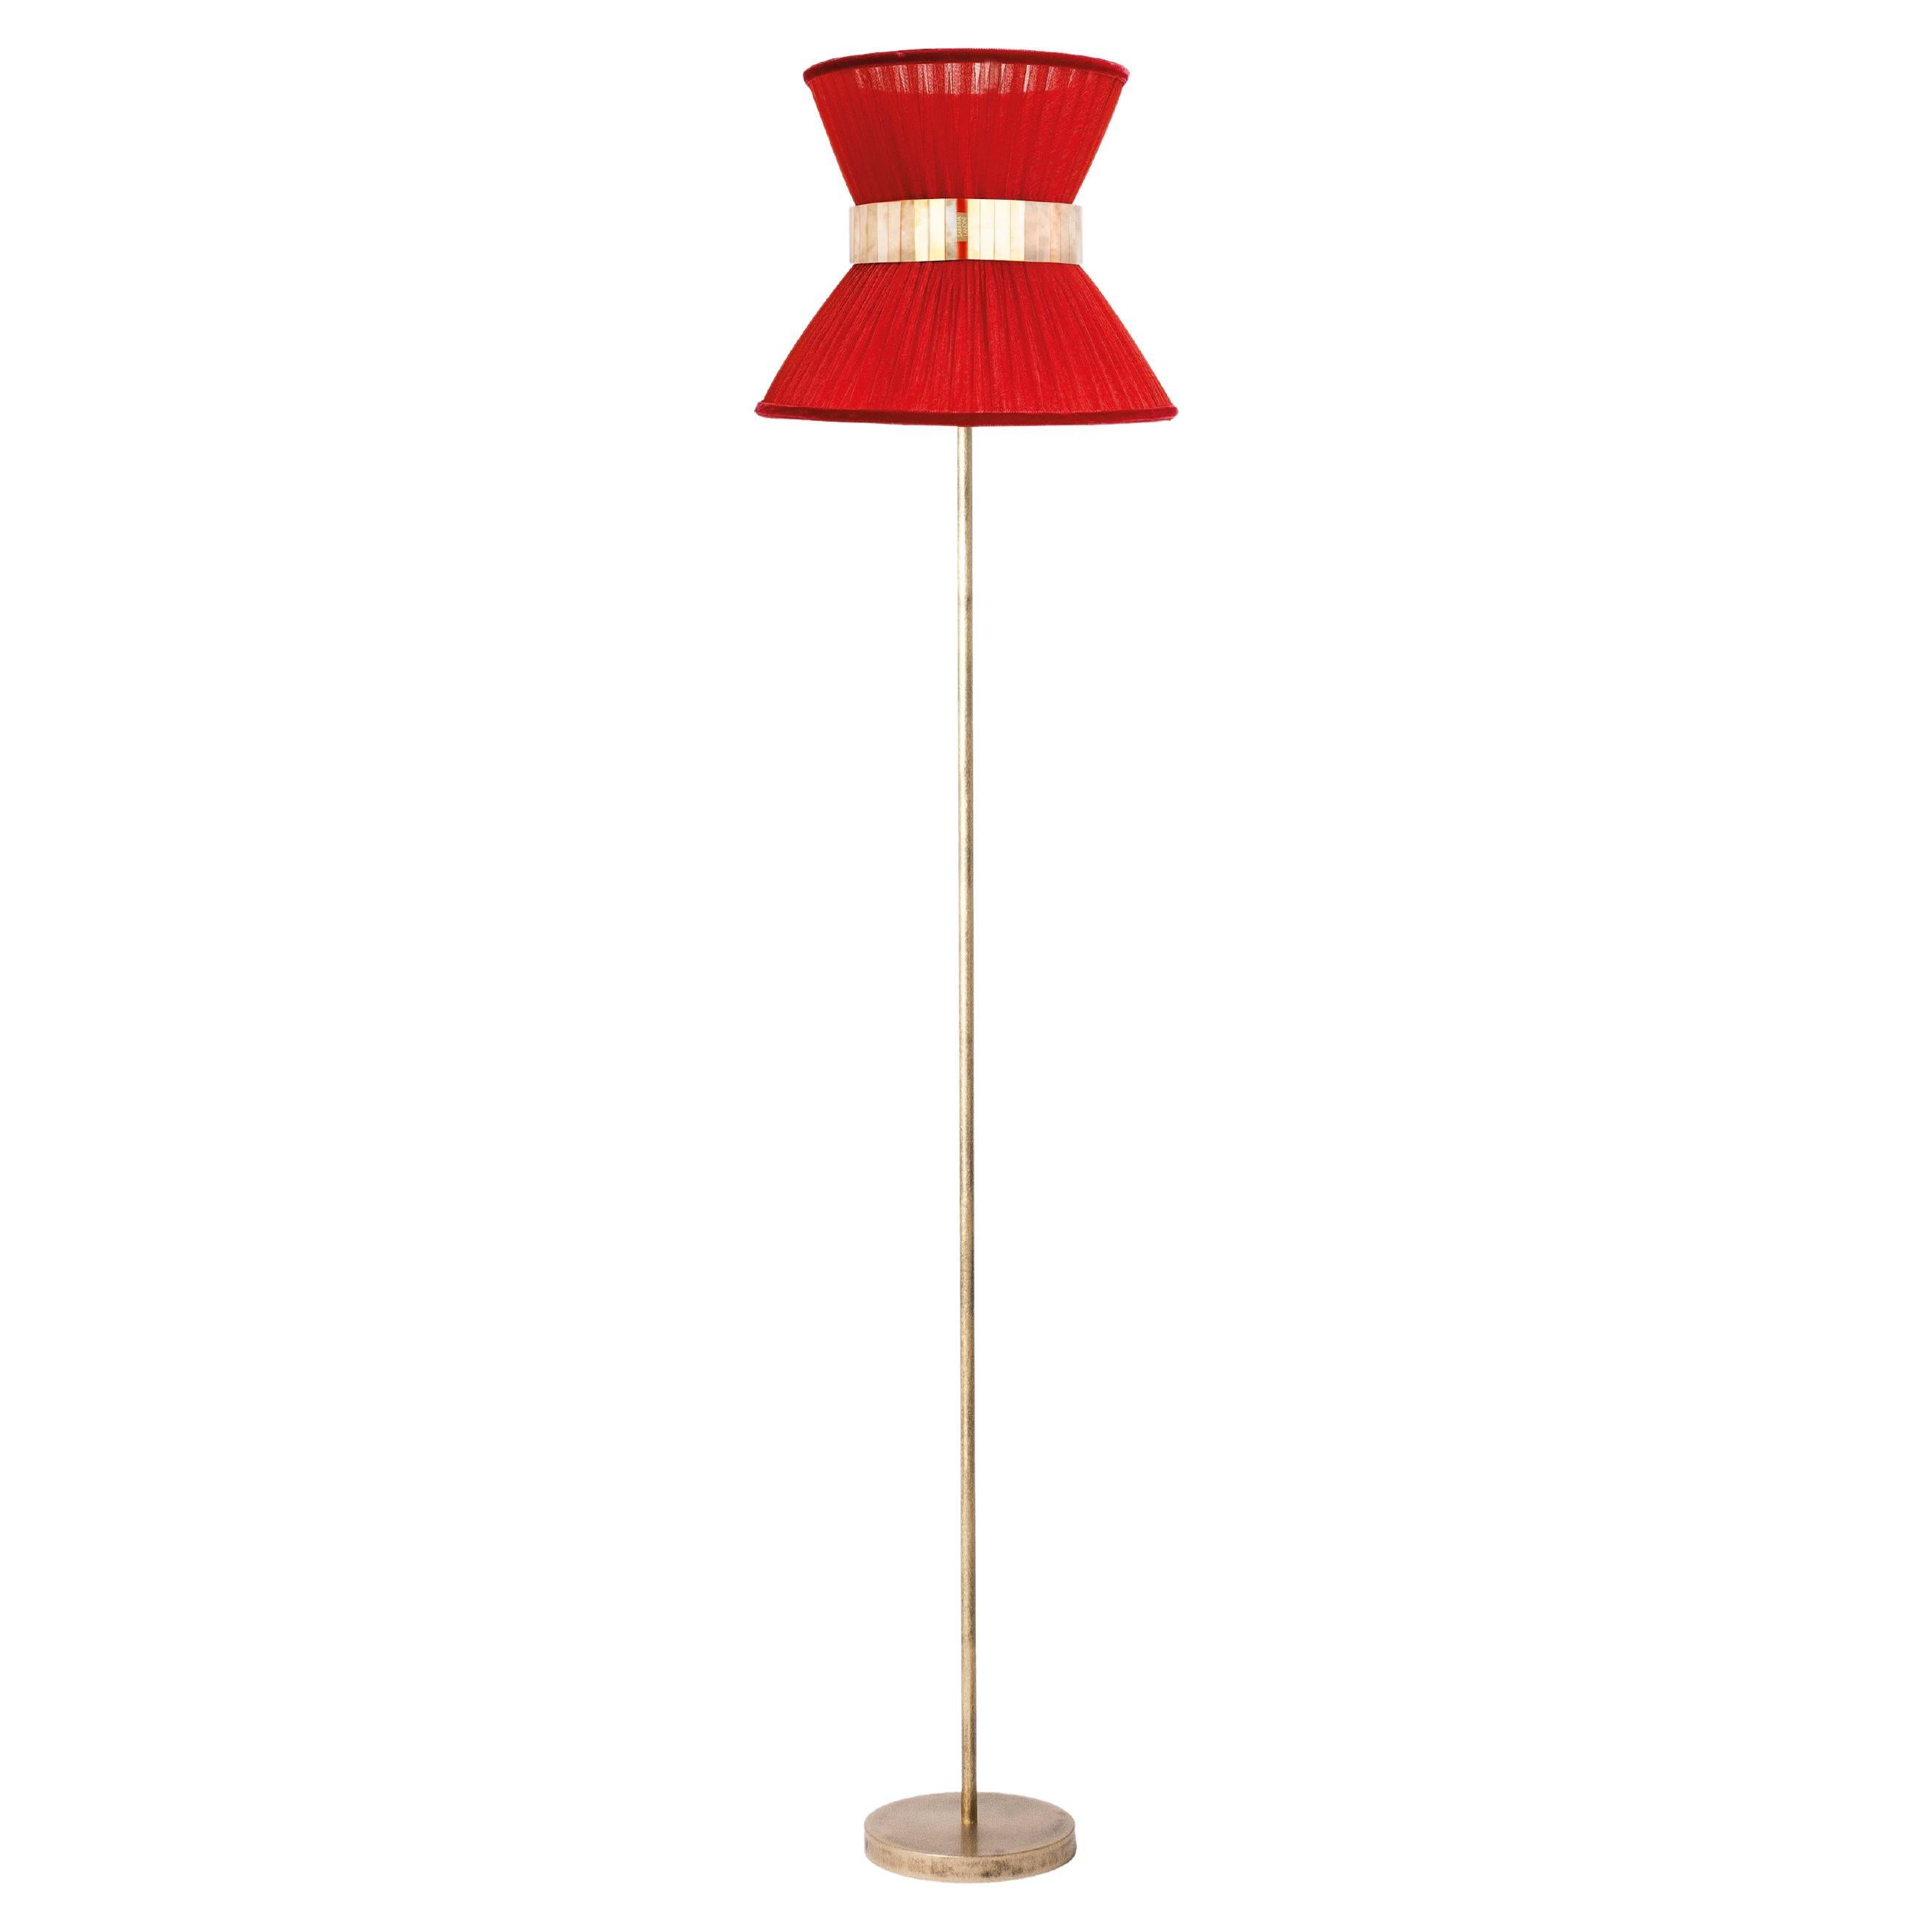 "Tiffany" Floor Lamp 30 Rust-Red Silk, Antiqued Silvered Glass, Brass For Sale